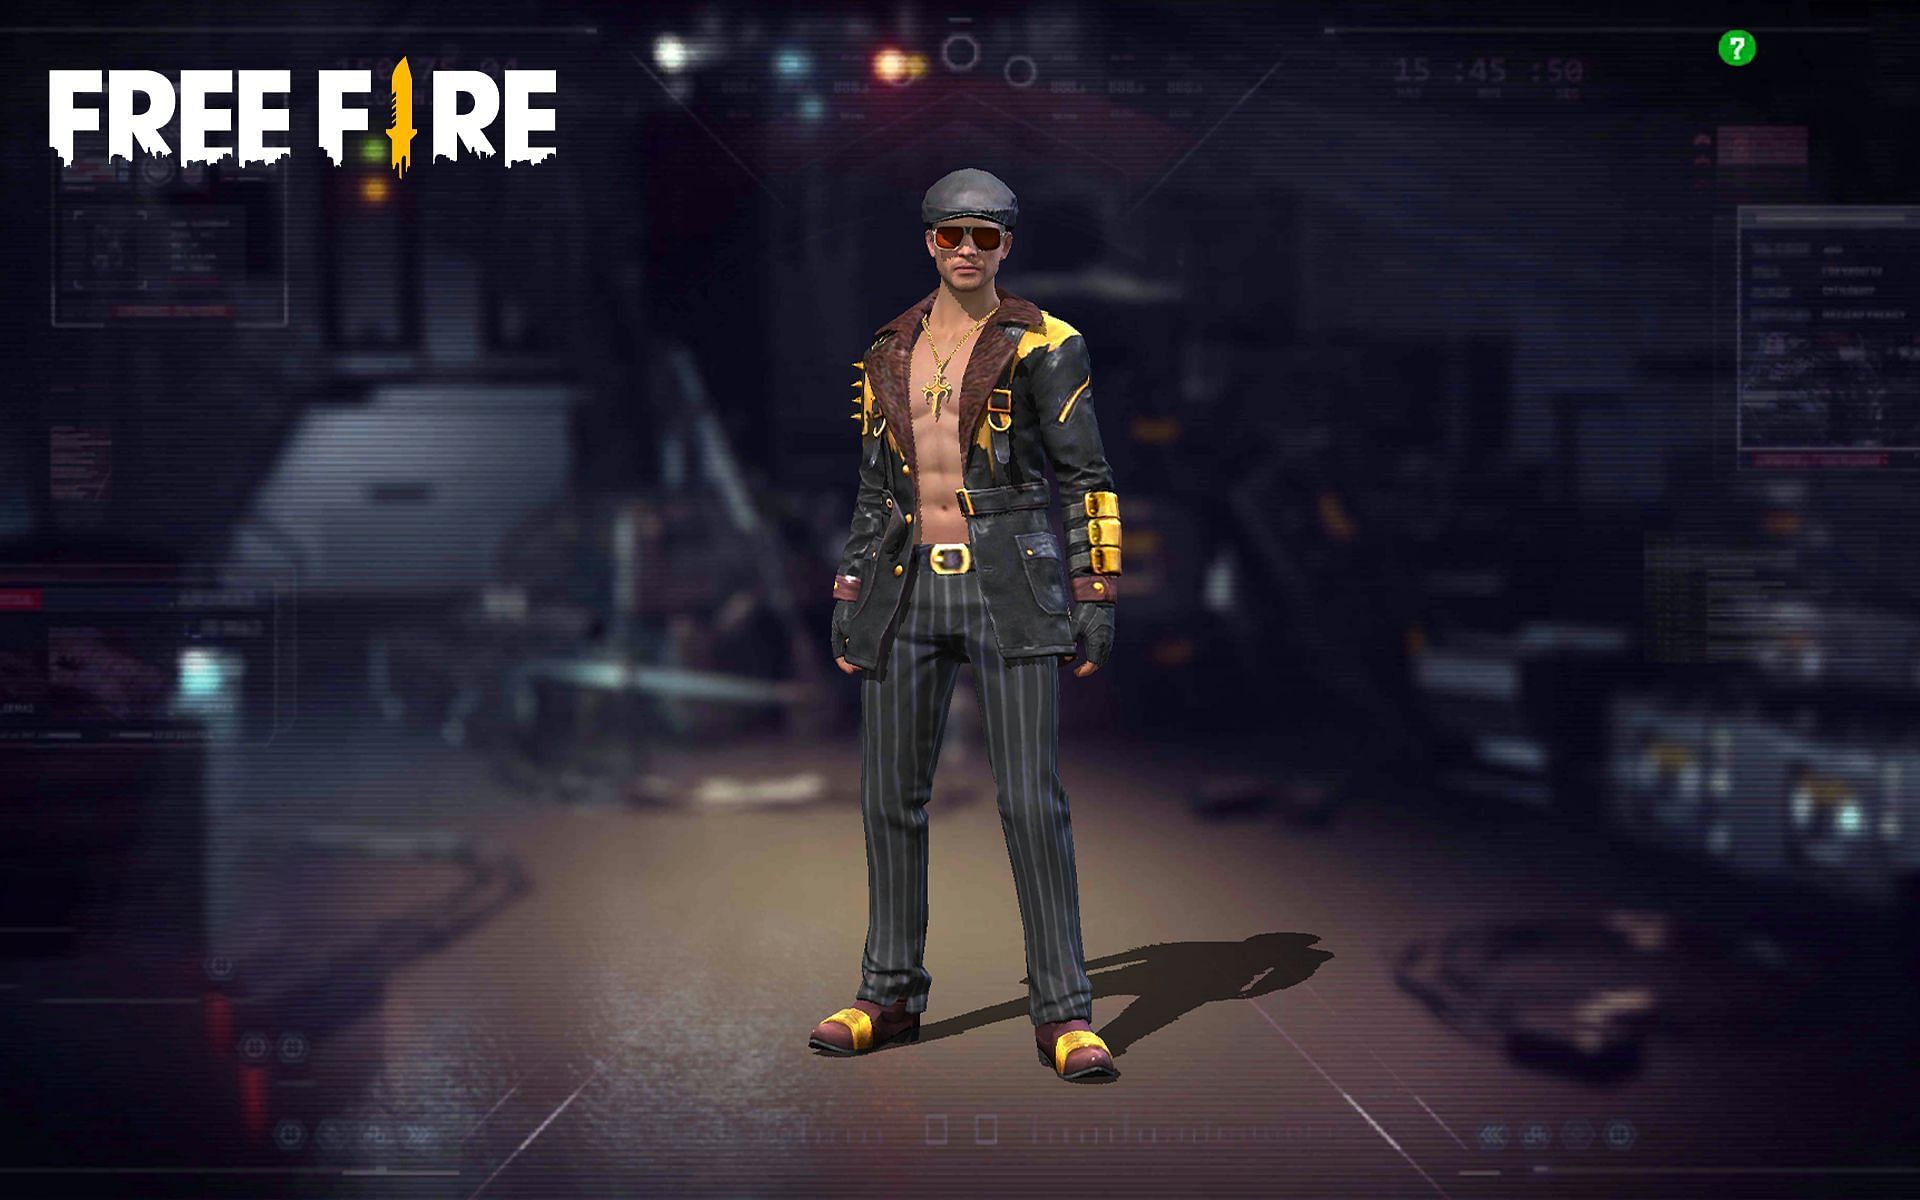 Users can get an item from the Mob Boss bundle by opening the crate (Image via Free Fire)